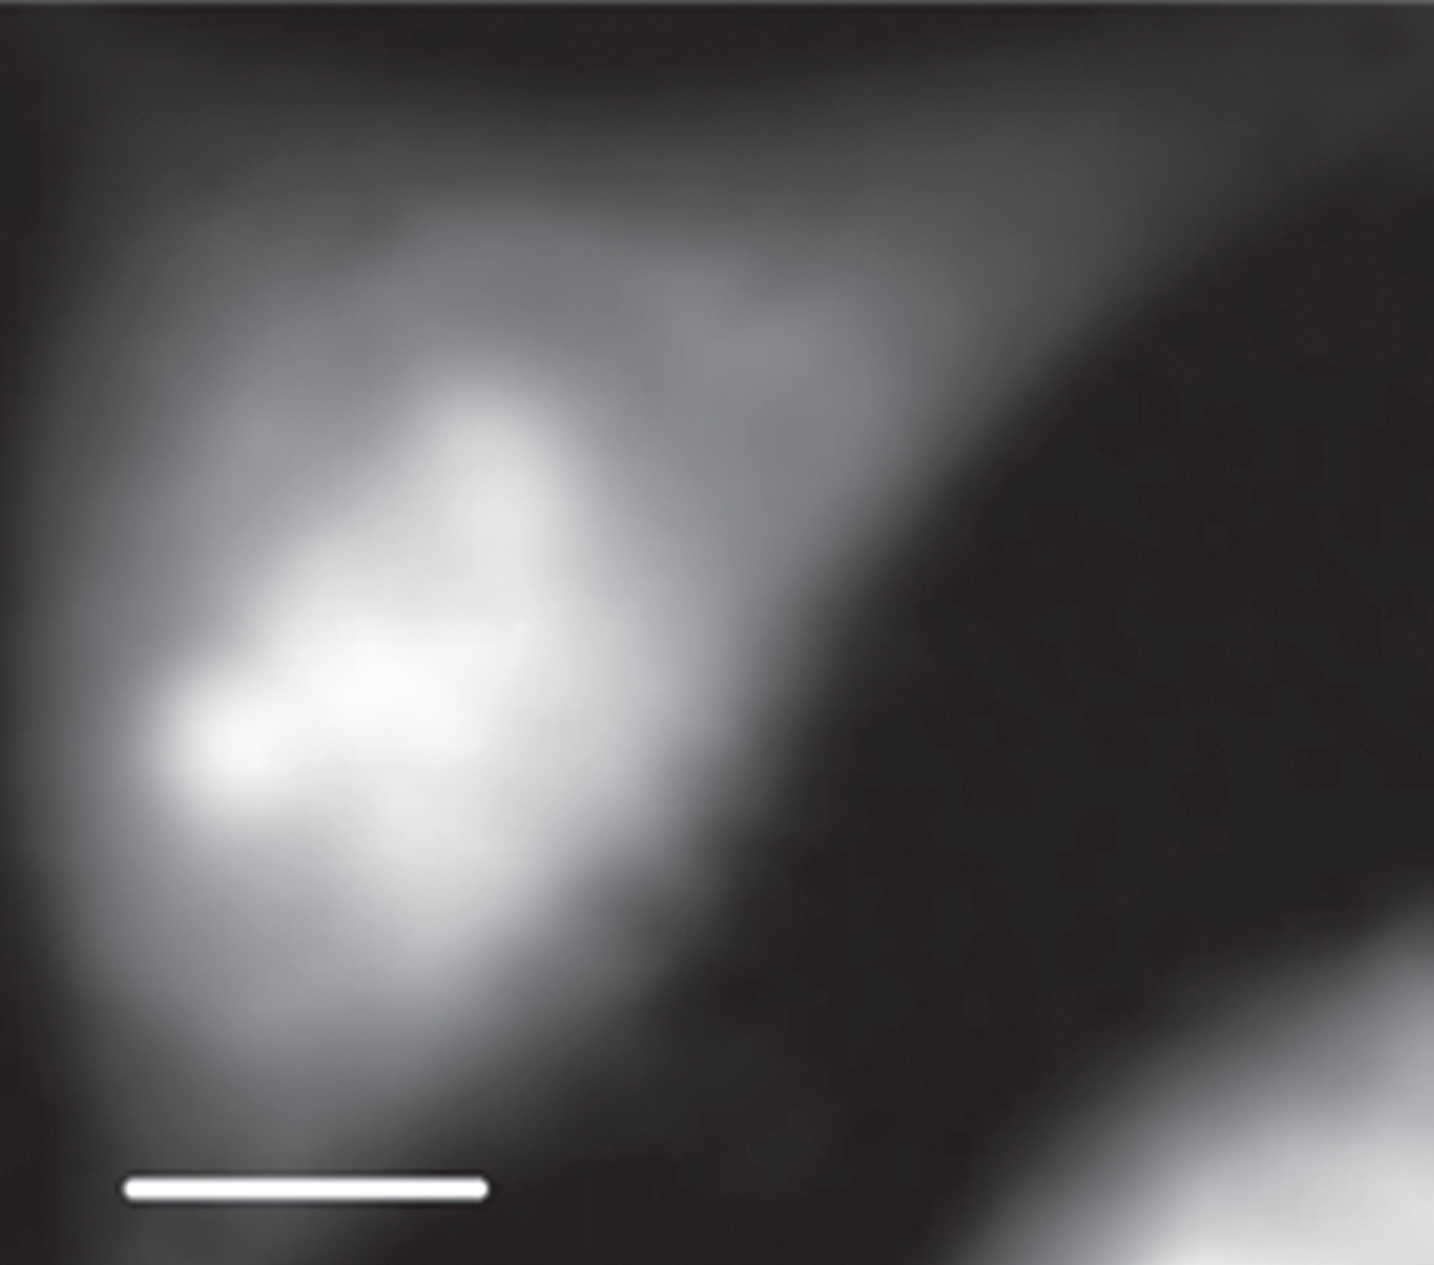 STXM image of an interphase CHO cell at 398 eV. The scale bar is 5μm.